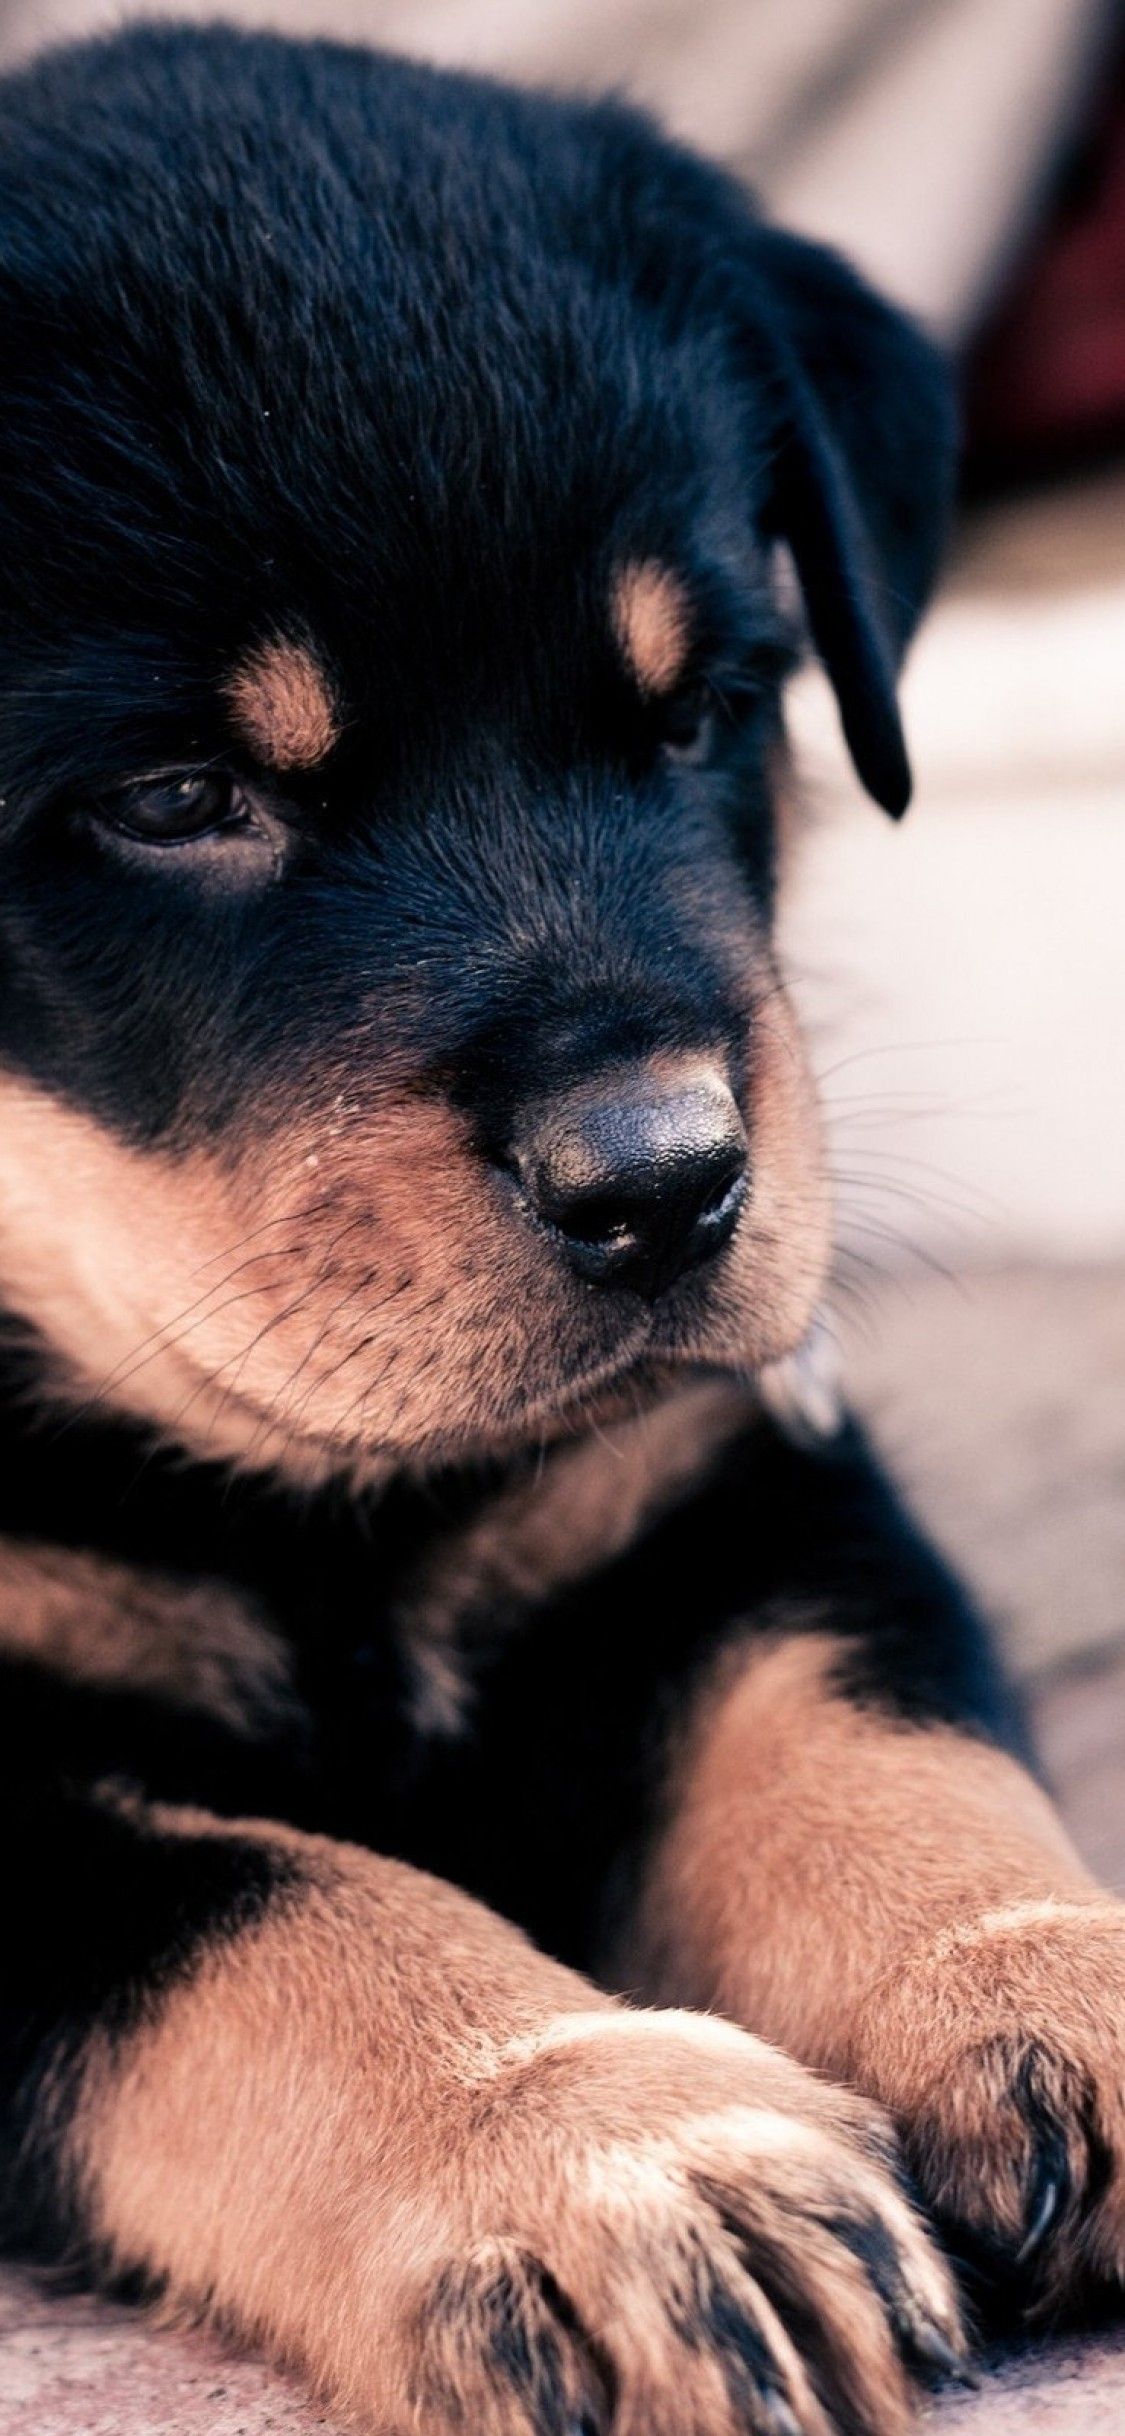 Download 1125x2436 Rottweiler, Cute, Paw, Puppy, Dogs Wallpaper